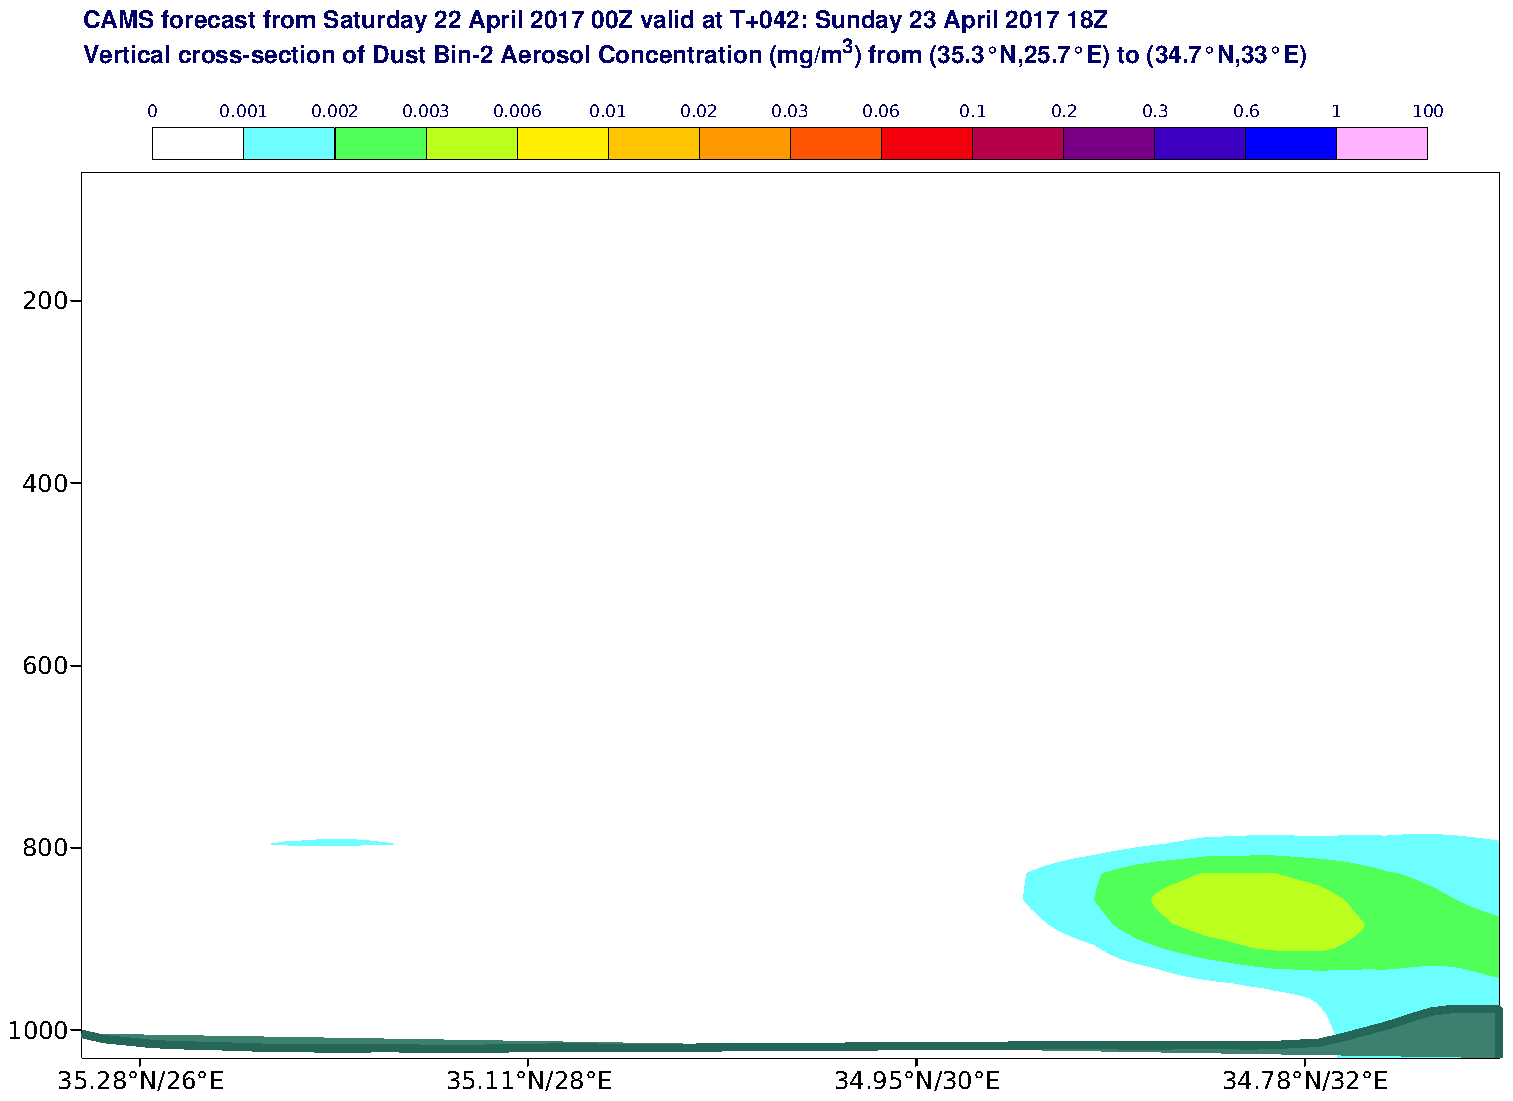 Vertical cross-section of Dust Bin-2 Aerosol Concentration (mg/m3) valid at T42 - 2017-04-23 18:00